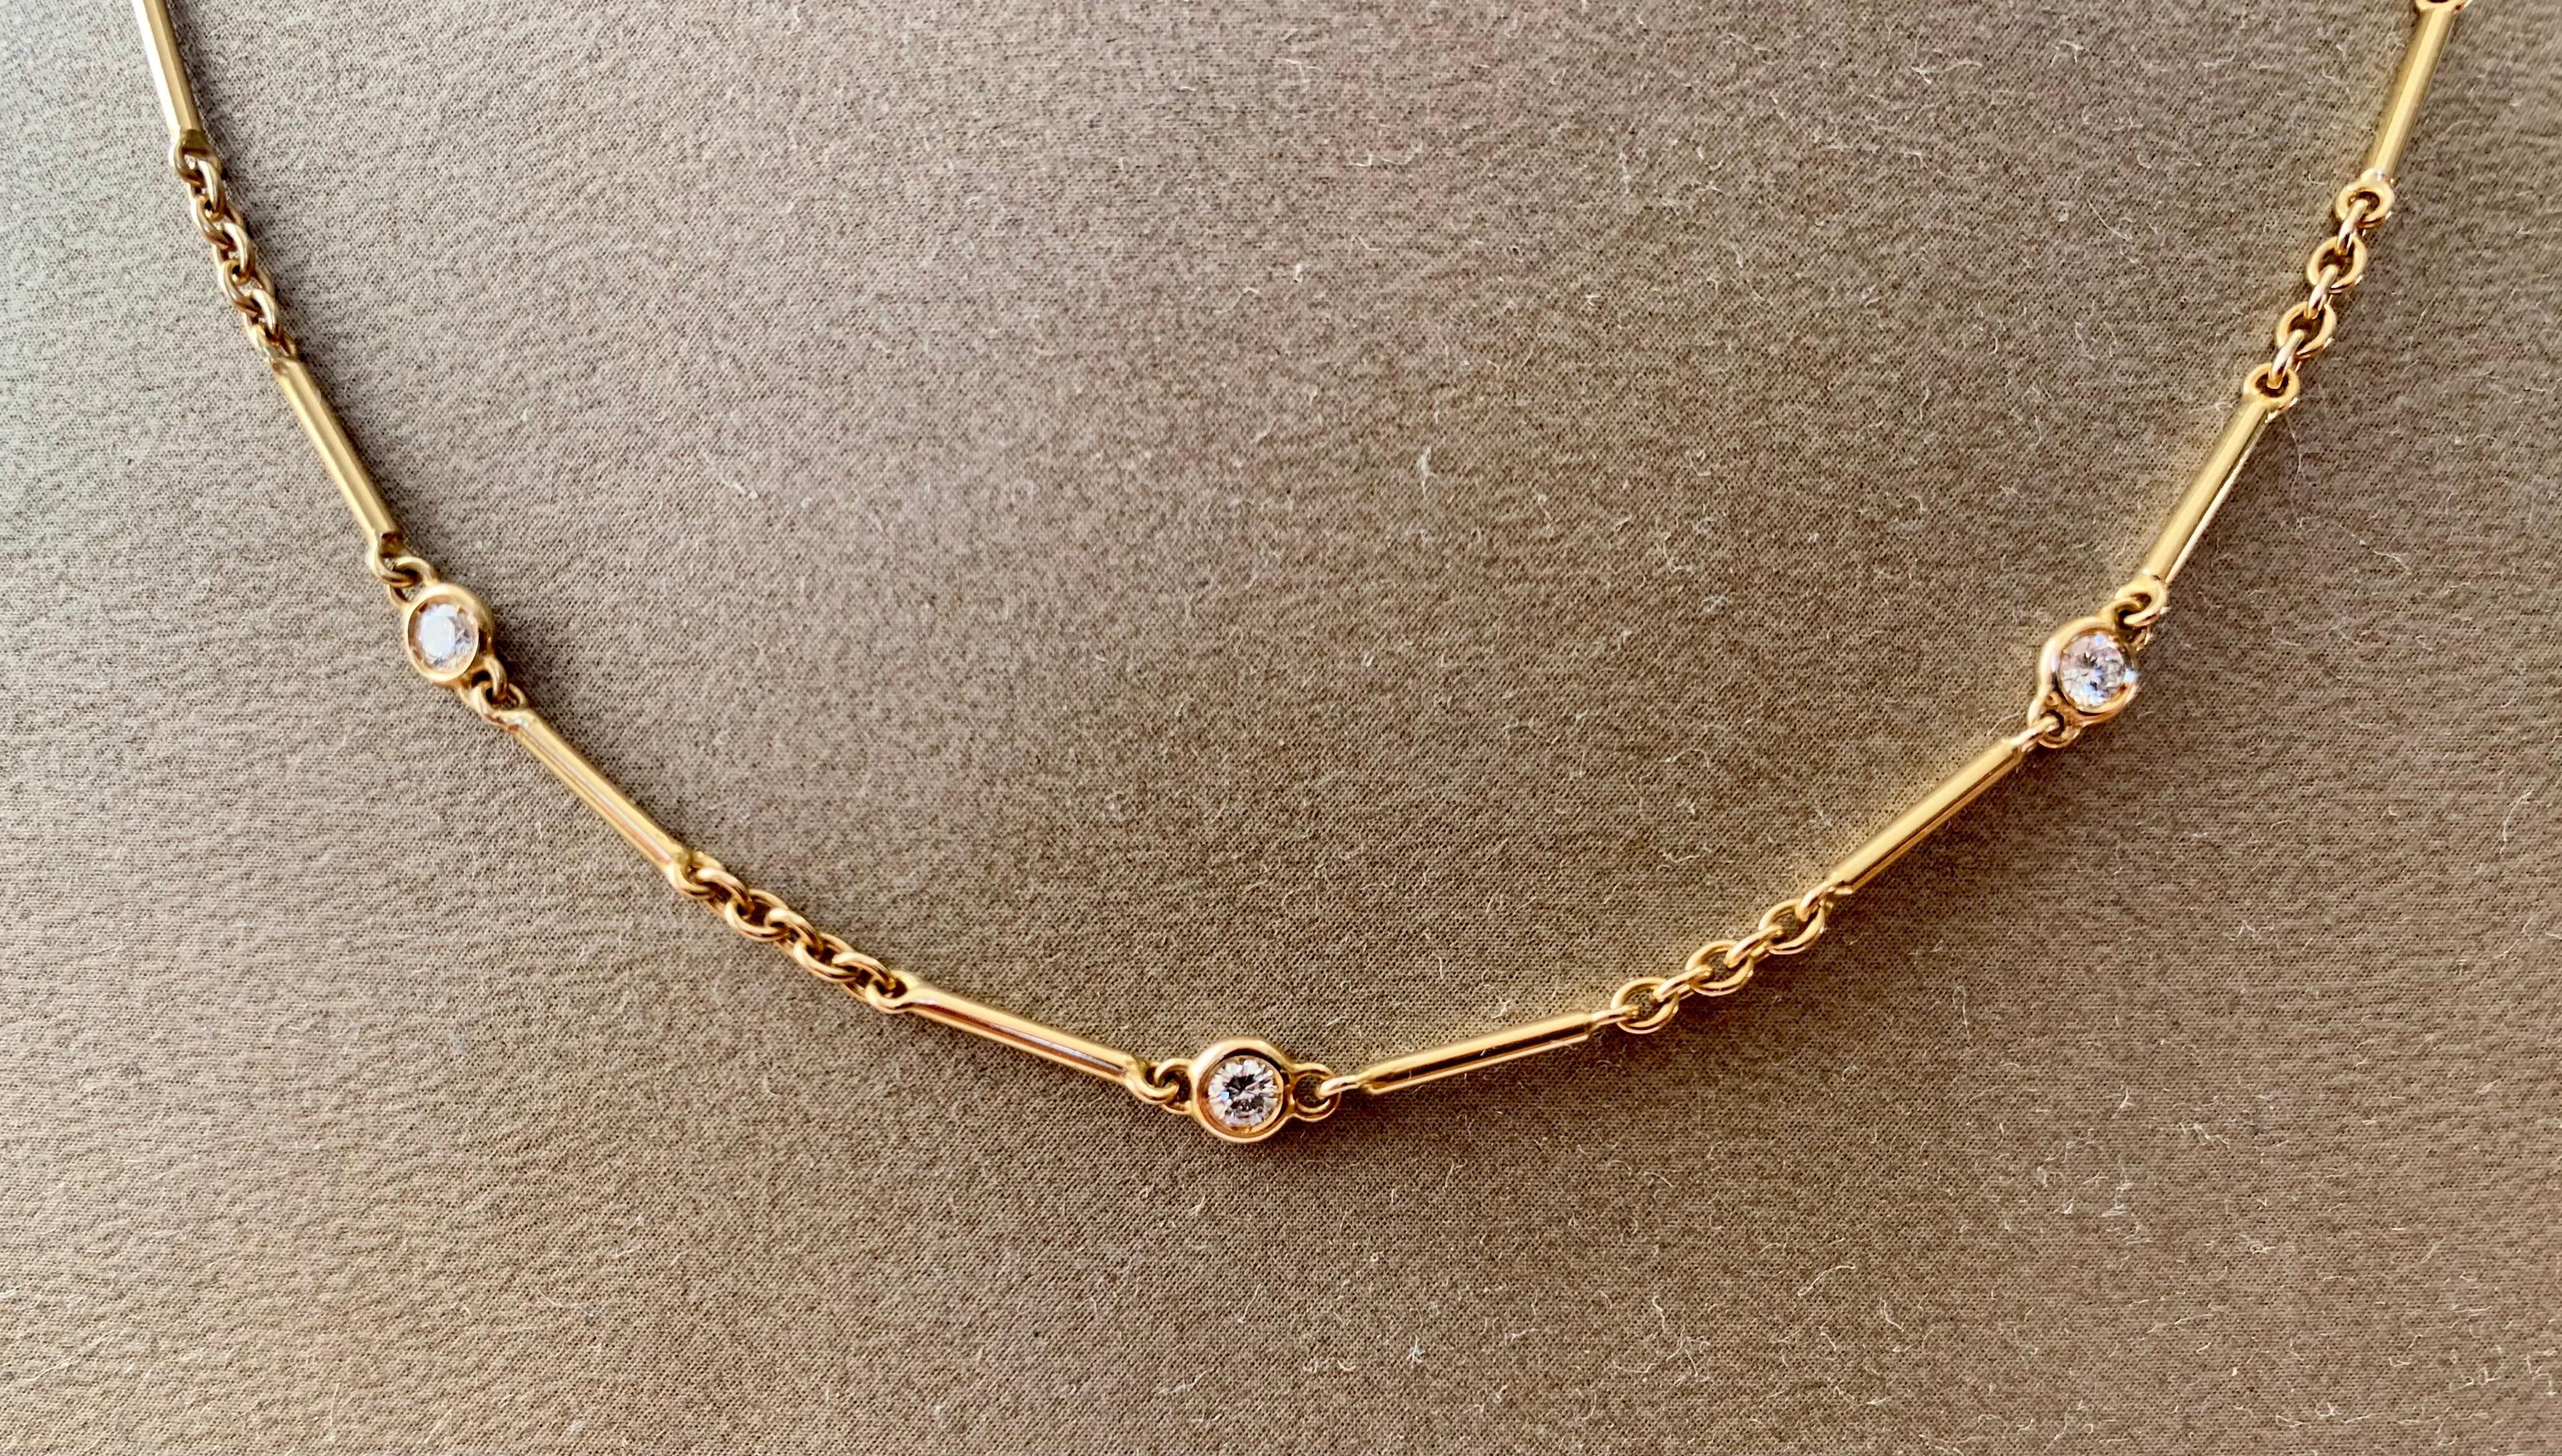 18 K yellow Gold Diamants Légers Diamond By The Yard Choker Necklace by Cartier. With 11 round brilliant cut diamonds  weighing approximately 1 ct, G color, VVS1 clarity. Stamped hallmarks and serial number 219725
Length: 39 cm.
Masterfully